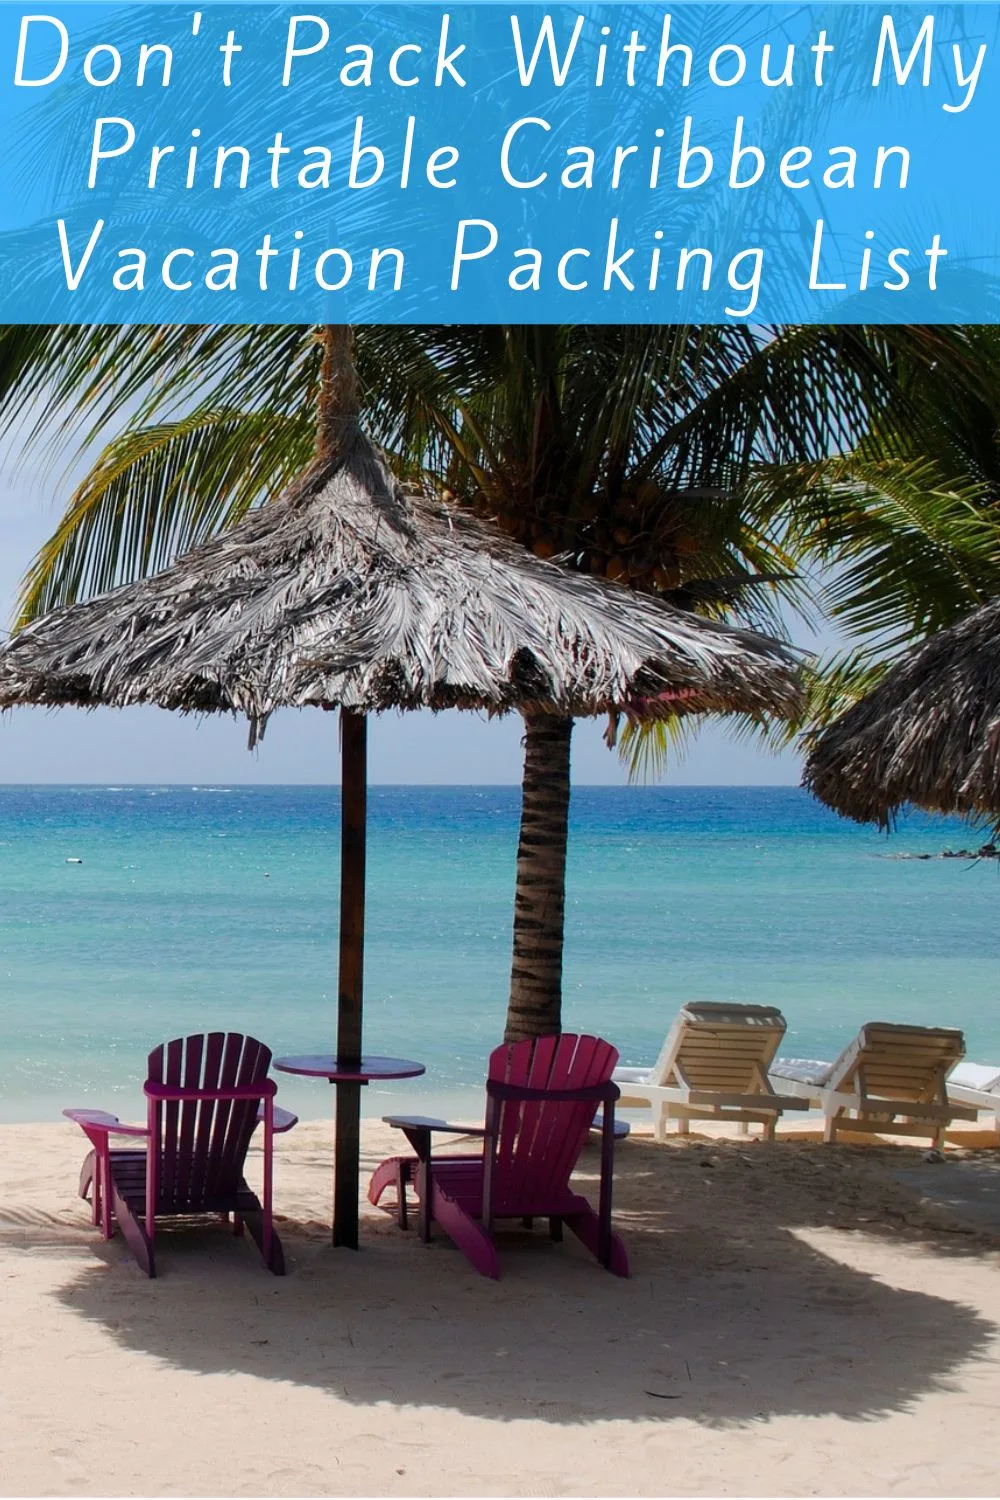 don't pack without my printable caribbean vacation packing list. here is my easy, ready-to-print packing list for your next caribbean island vacation with kids. plus some packing tips you'll find handy. 